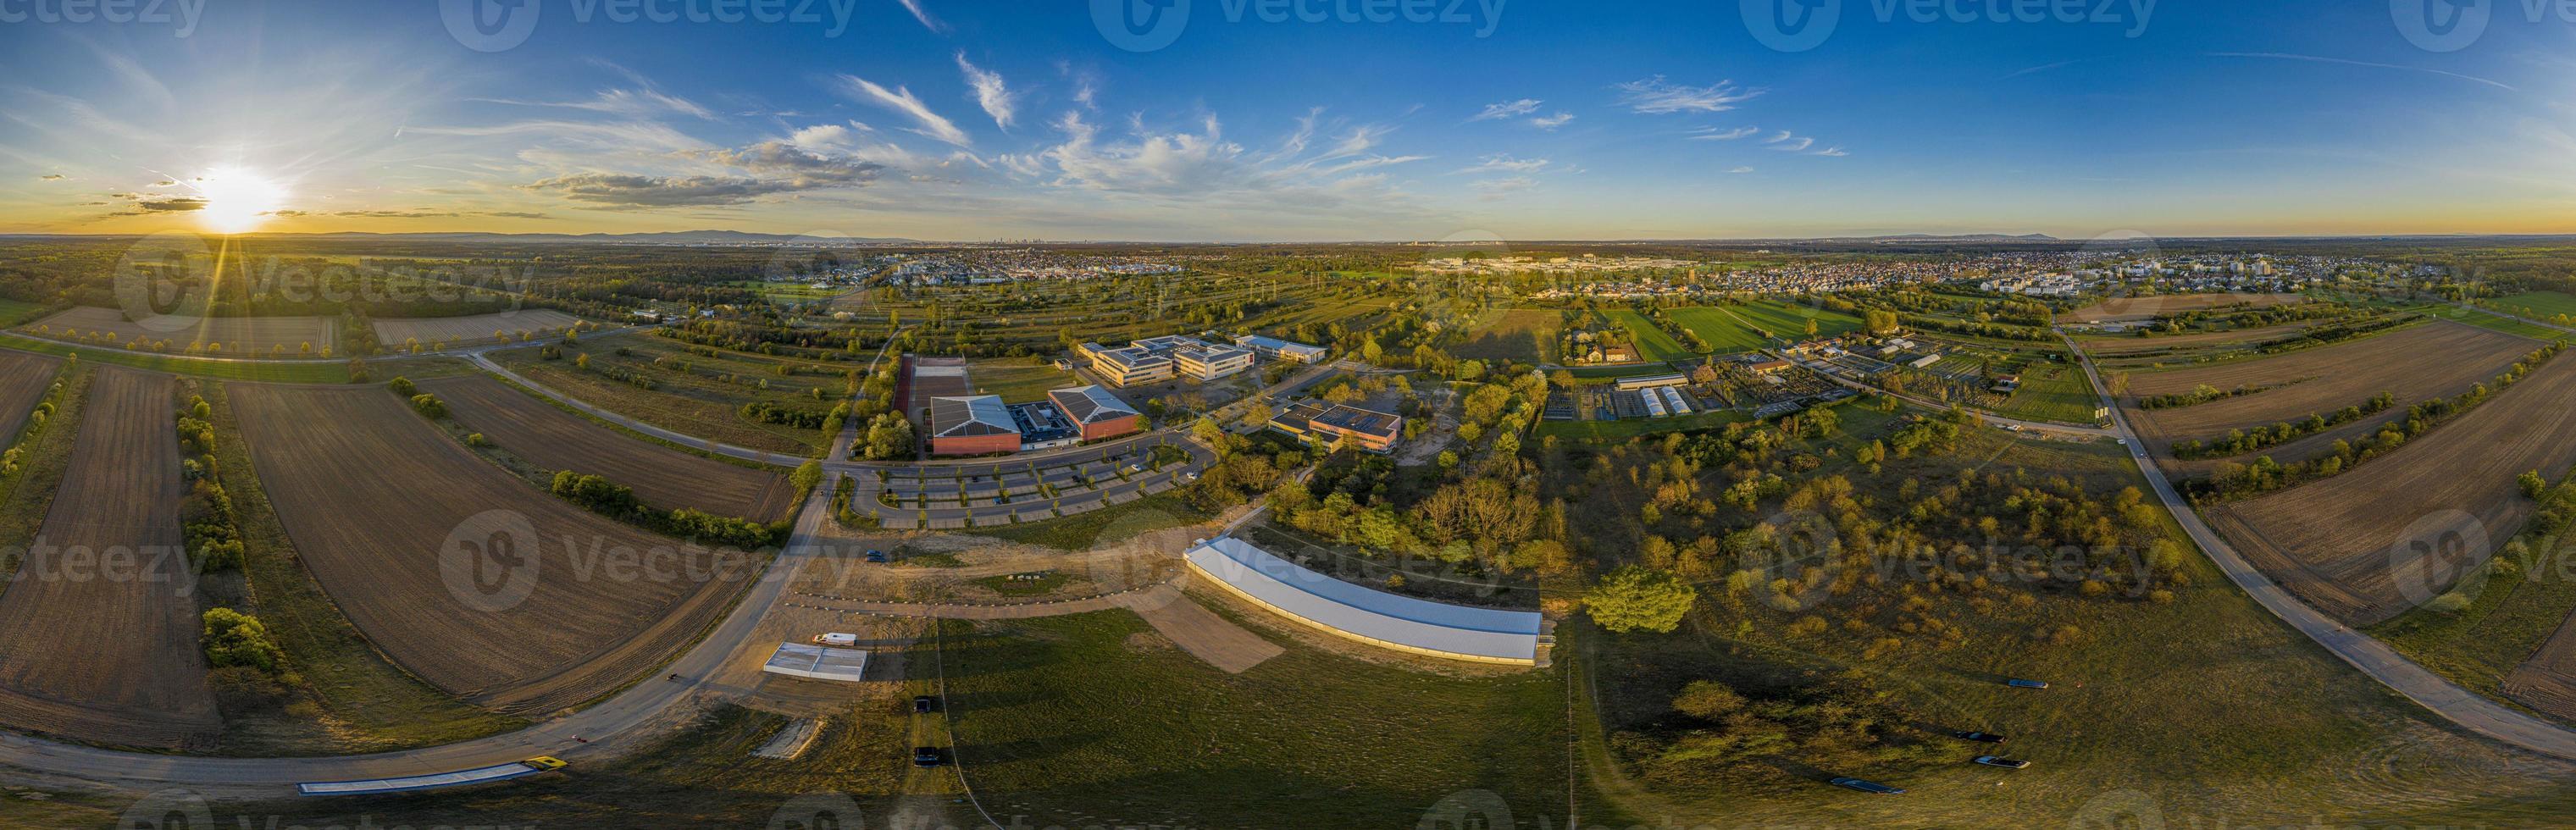 360 Panoramic drone picture of the city Moerfelden-Walldorf with the skyline of Frankfurt in the background at evening photo